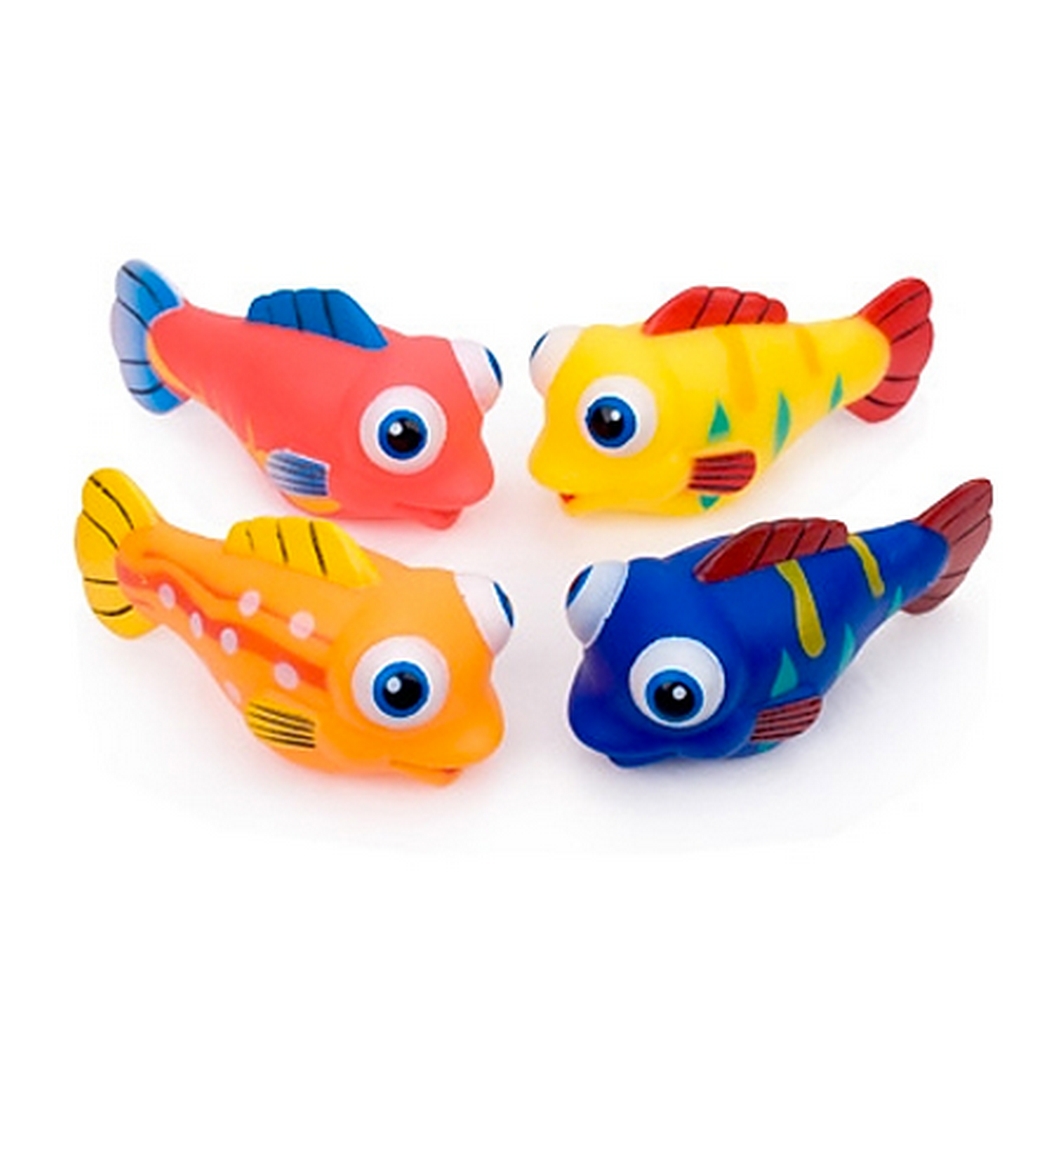 Fishing In The Paddling Pool. Childrens Toys In The Pool. Toy Fish